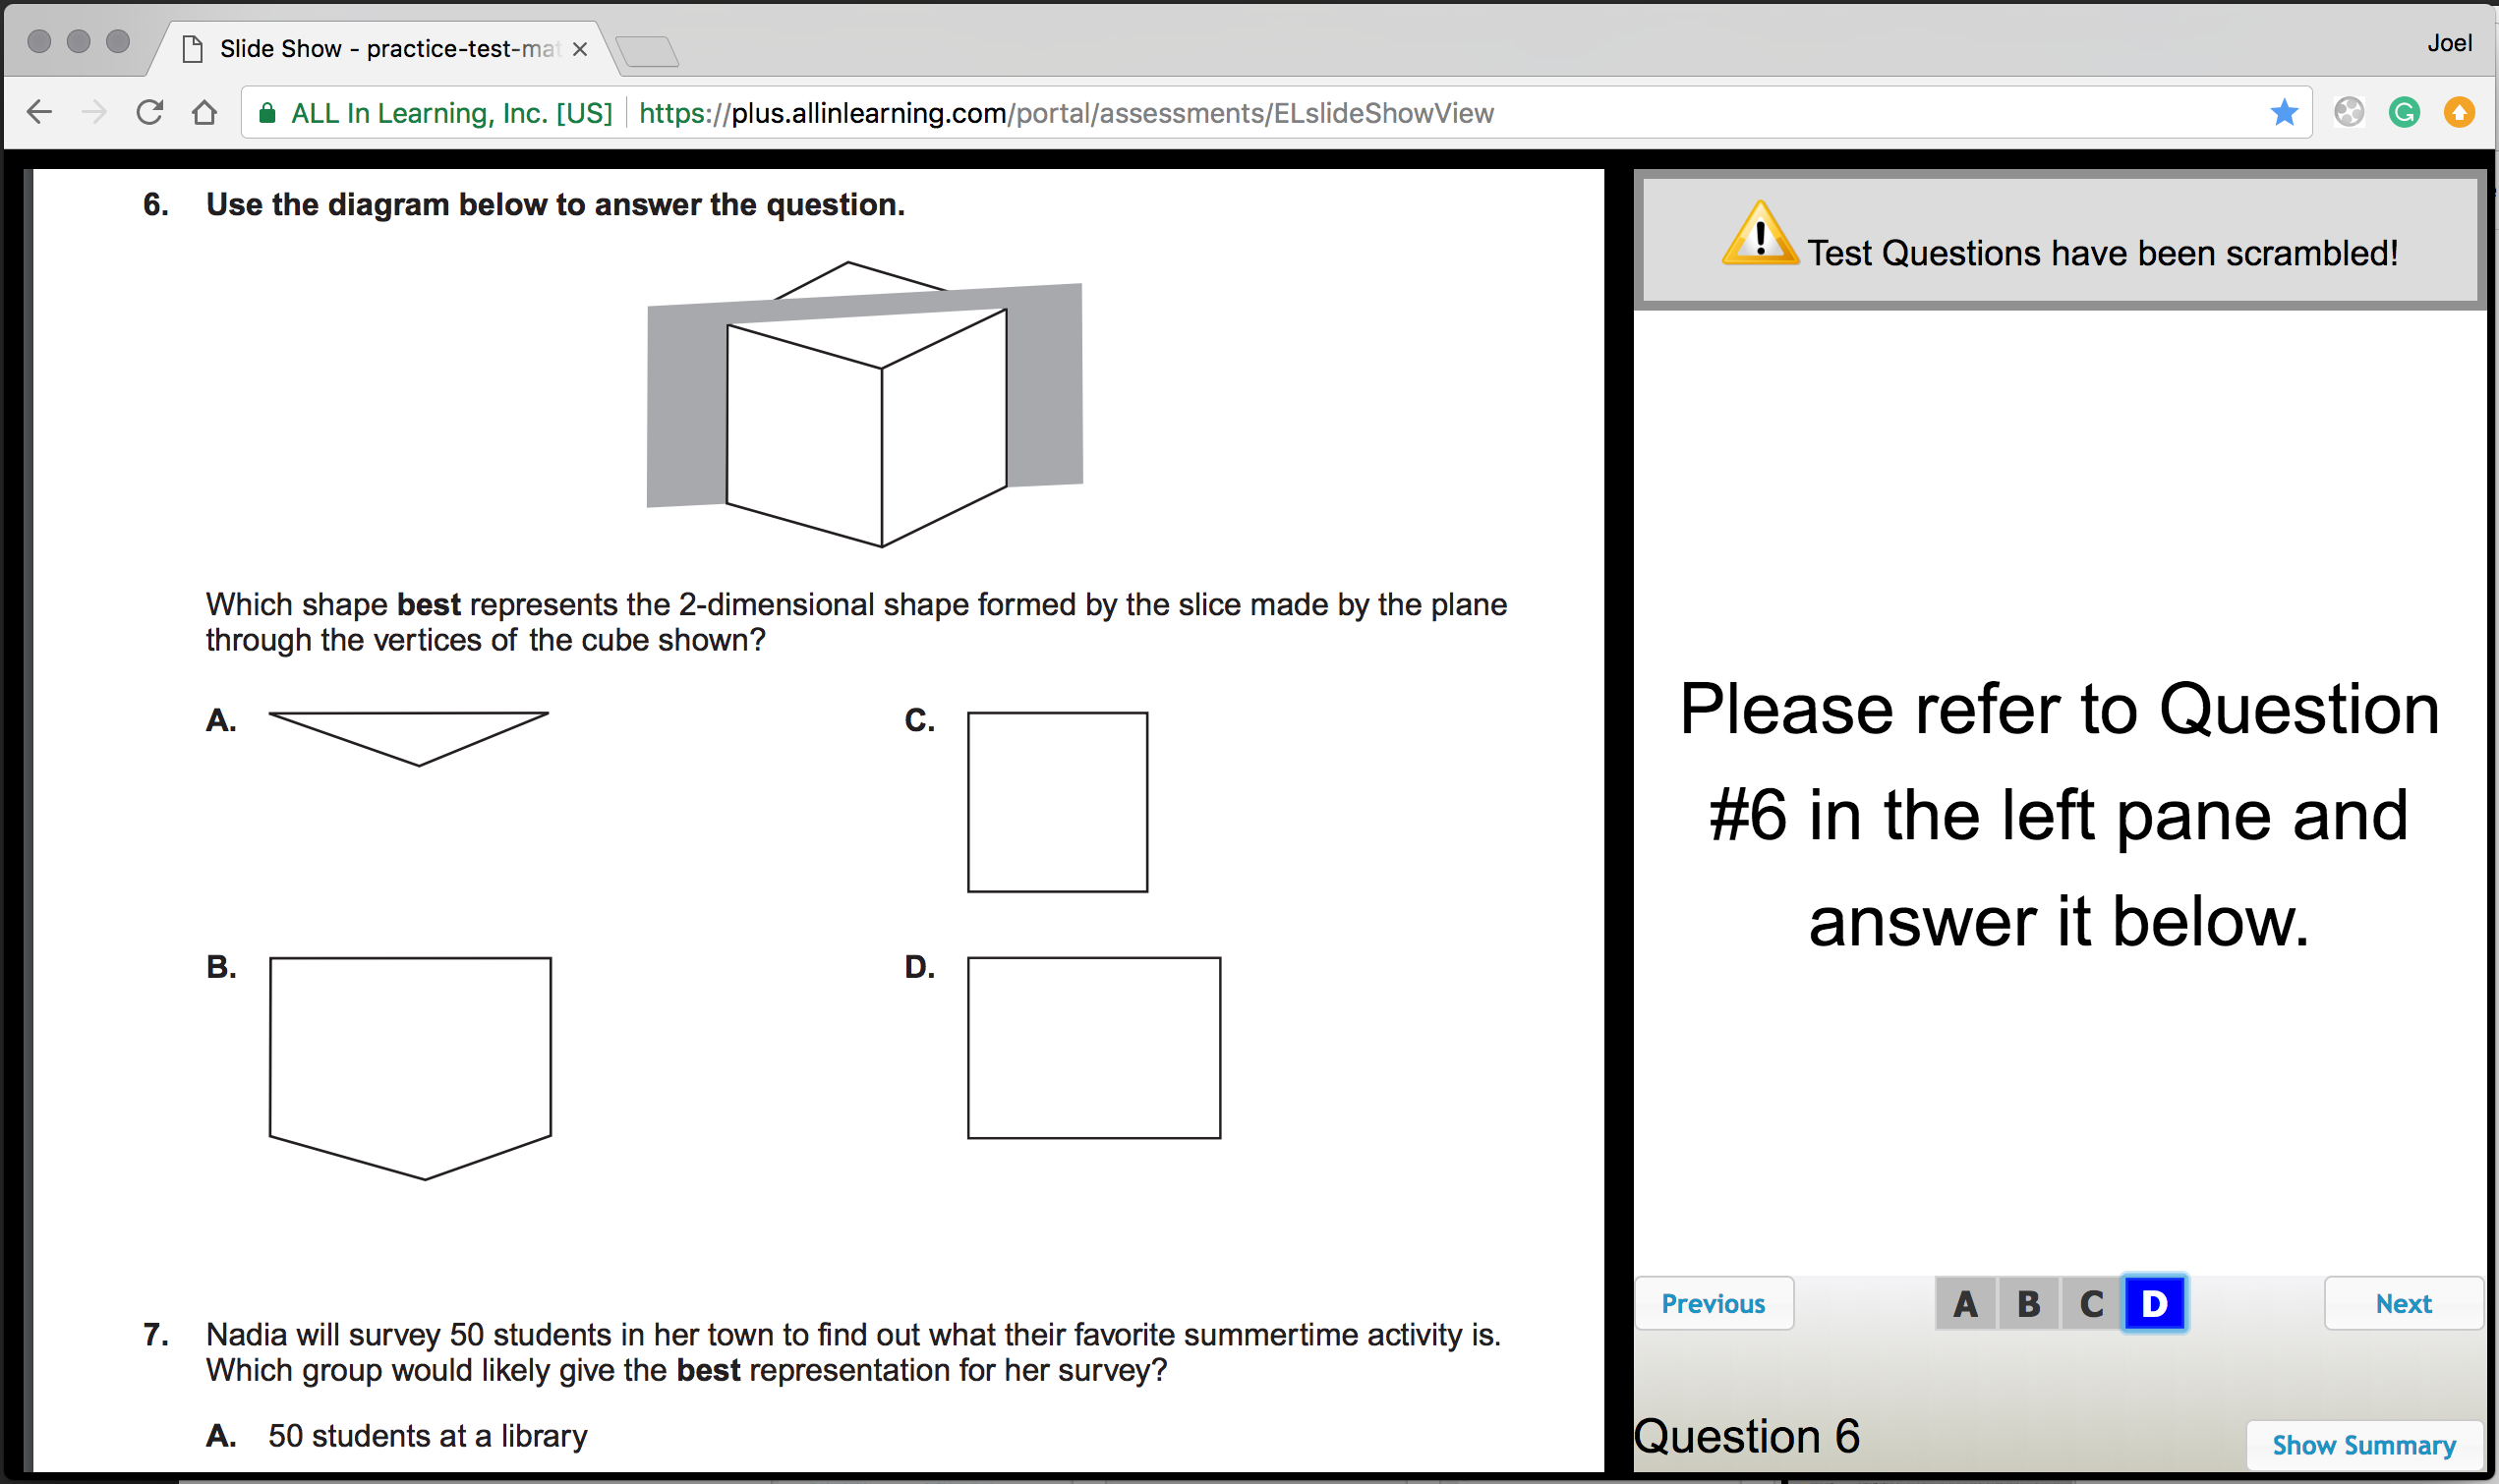 new-features-upgrades-use-pdfs-for-testing-on-student-devices-and-scramble-questions